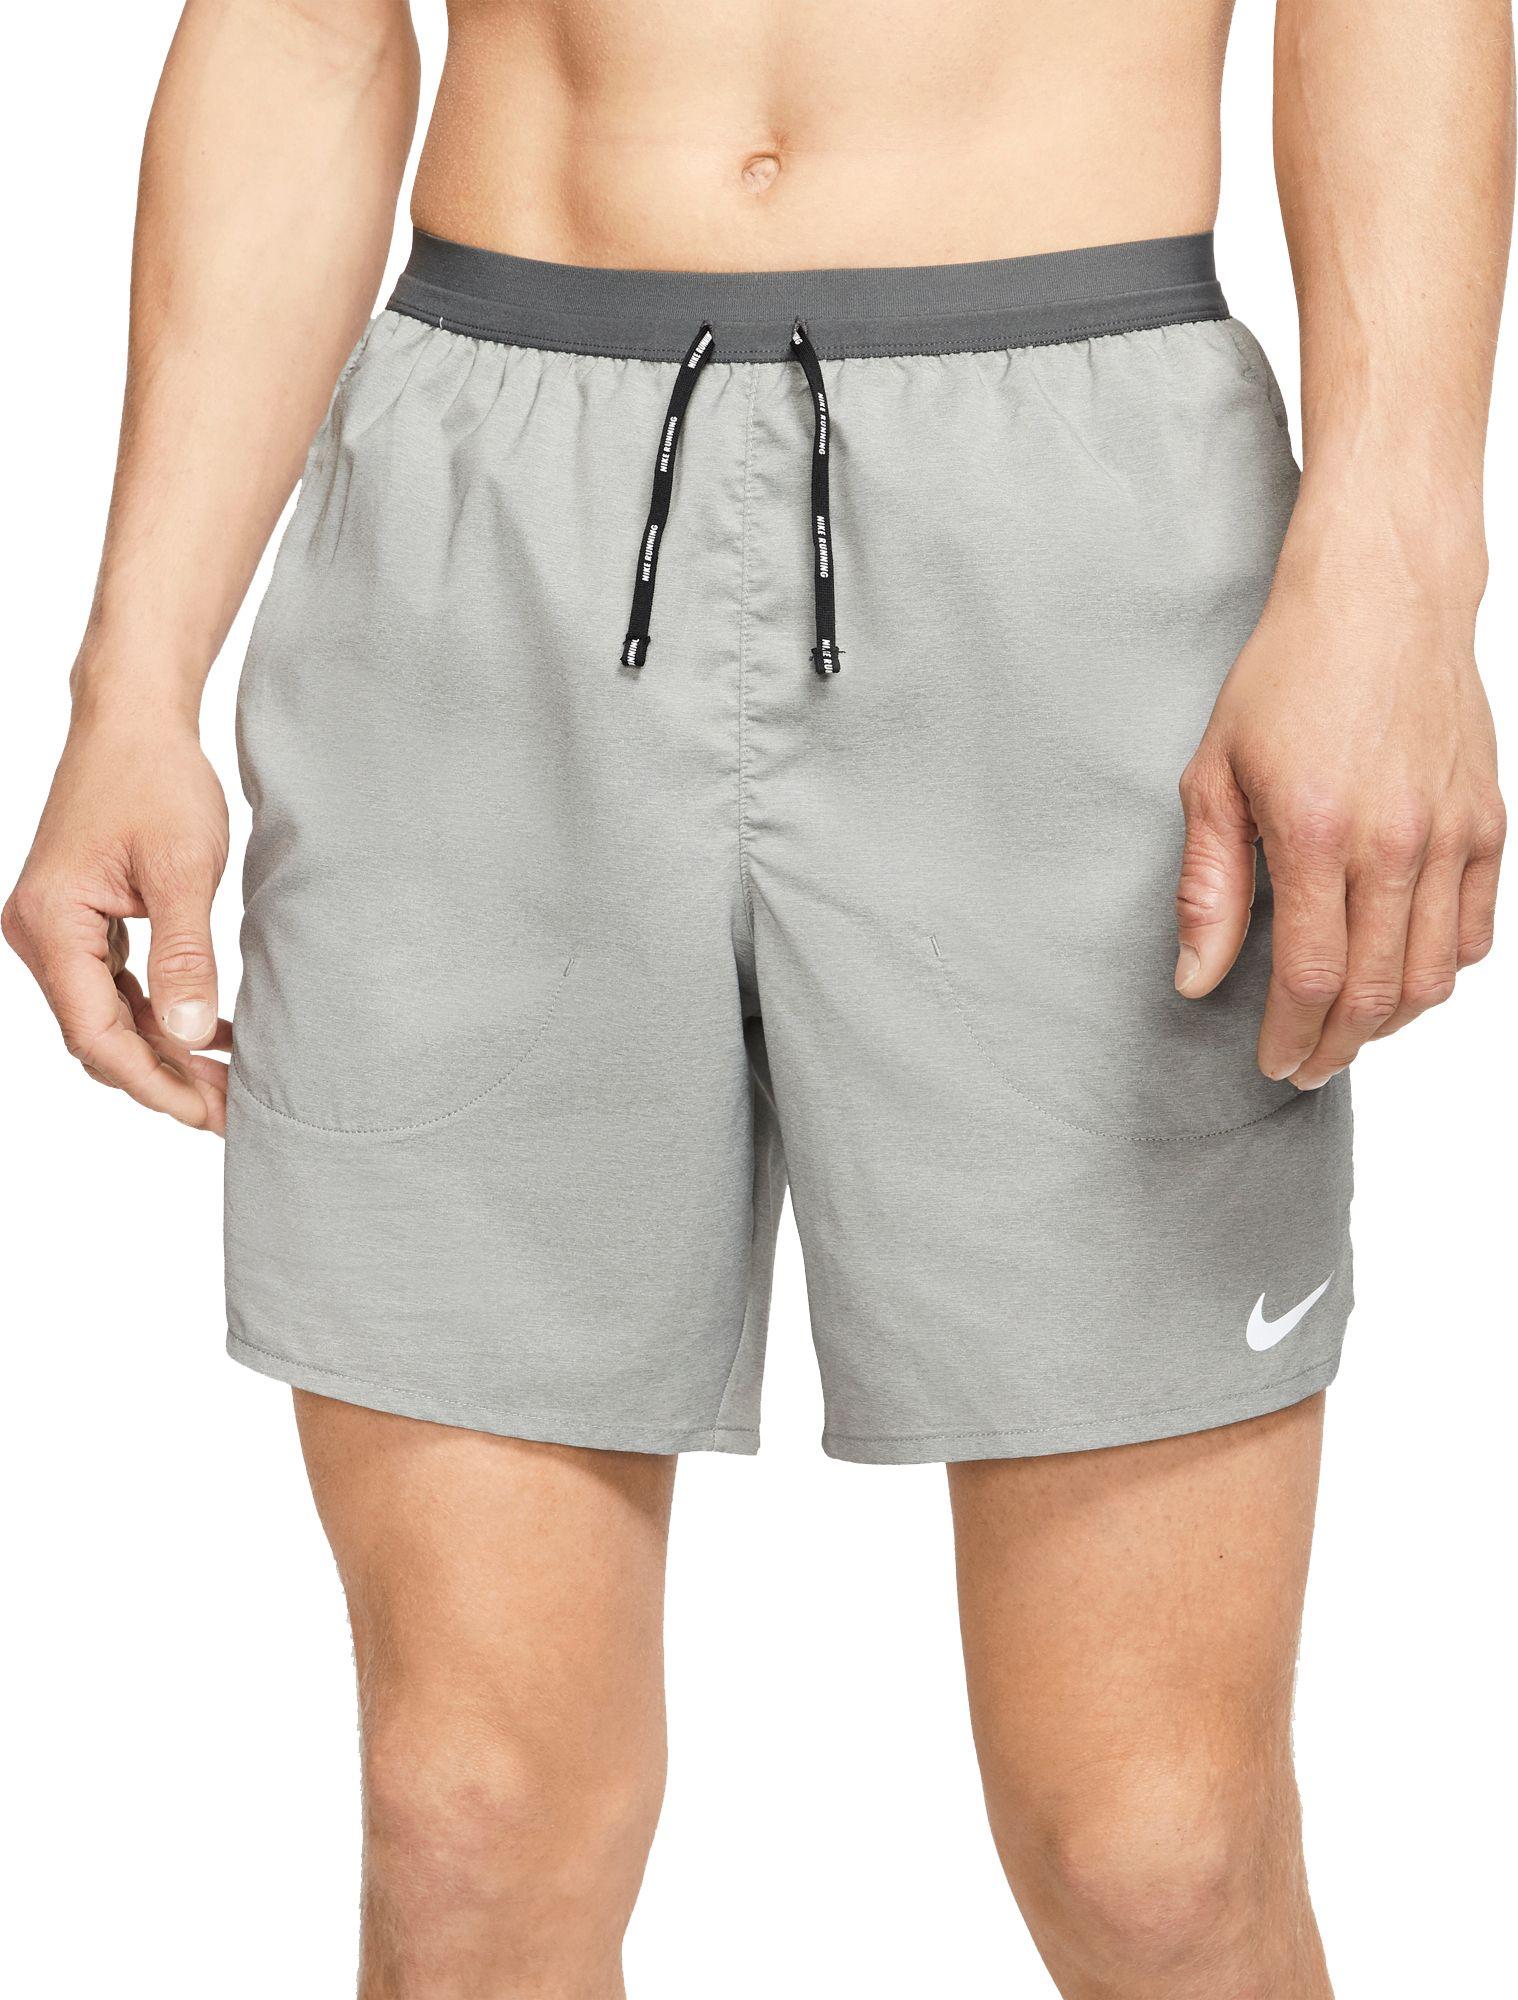 Nike Synthetic Flex Stride 7'' Brief Running Shorts in Iron Grey (Gray ...